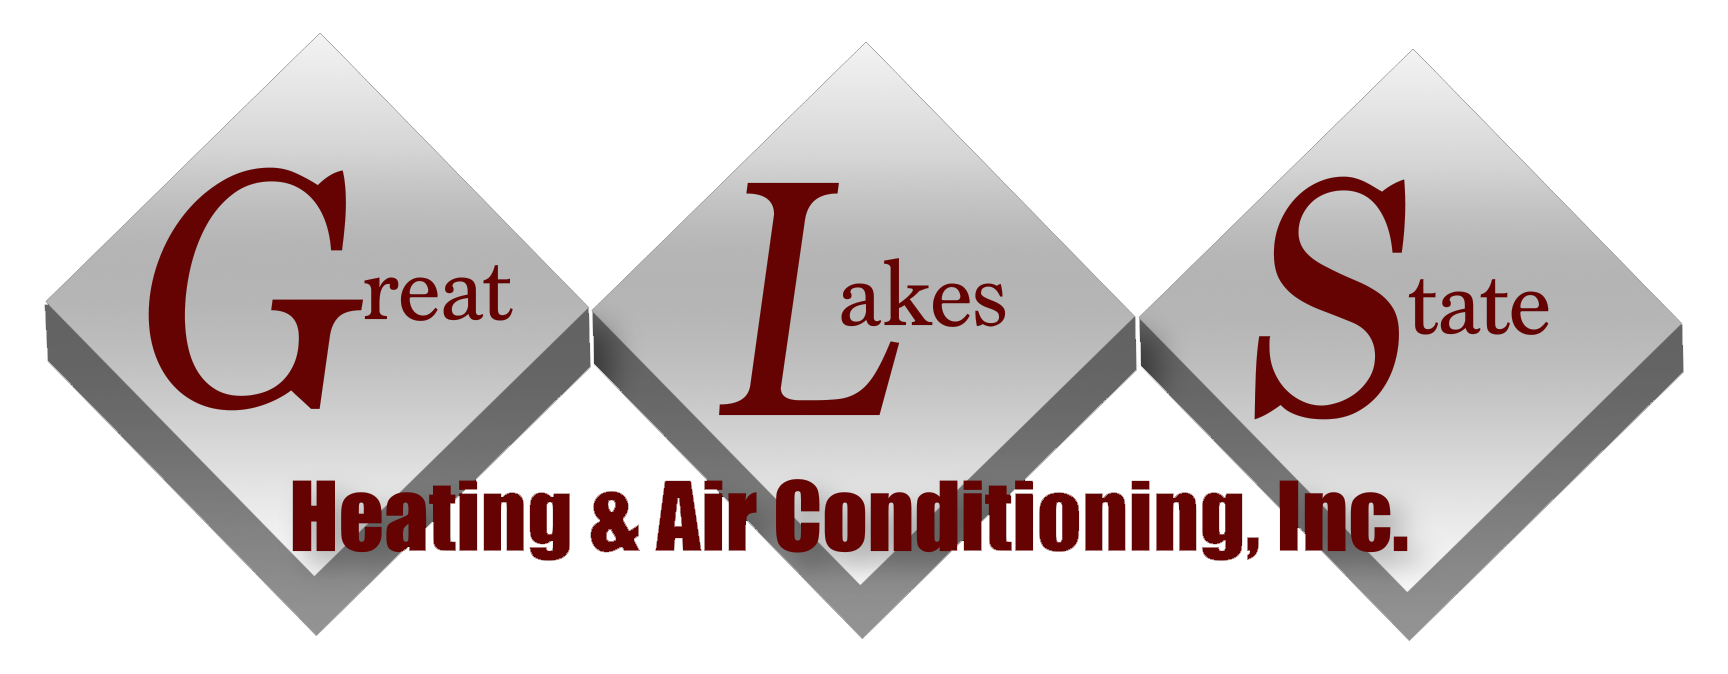 GLS Heating & Air Conditioning, Inc.